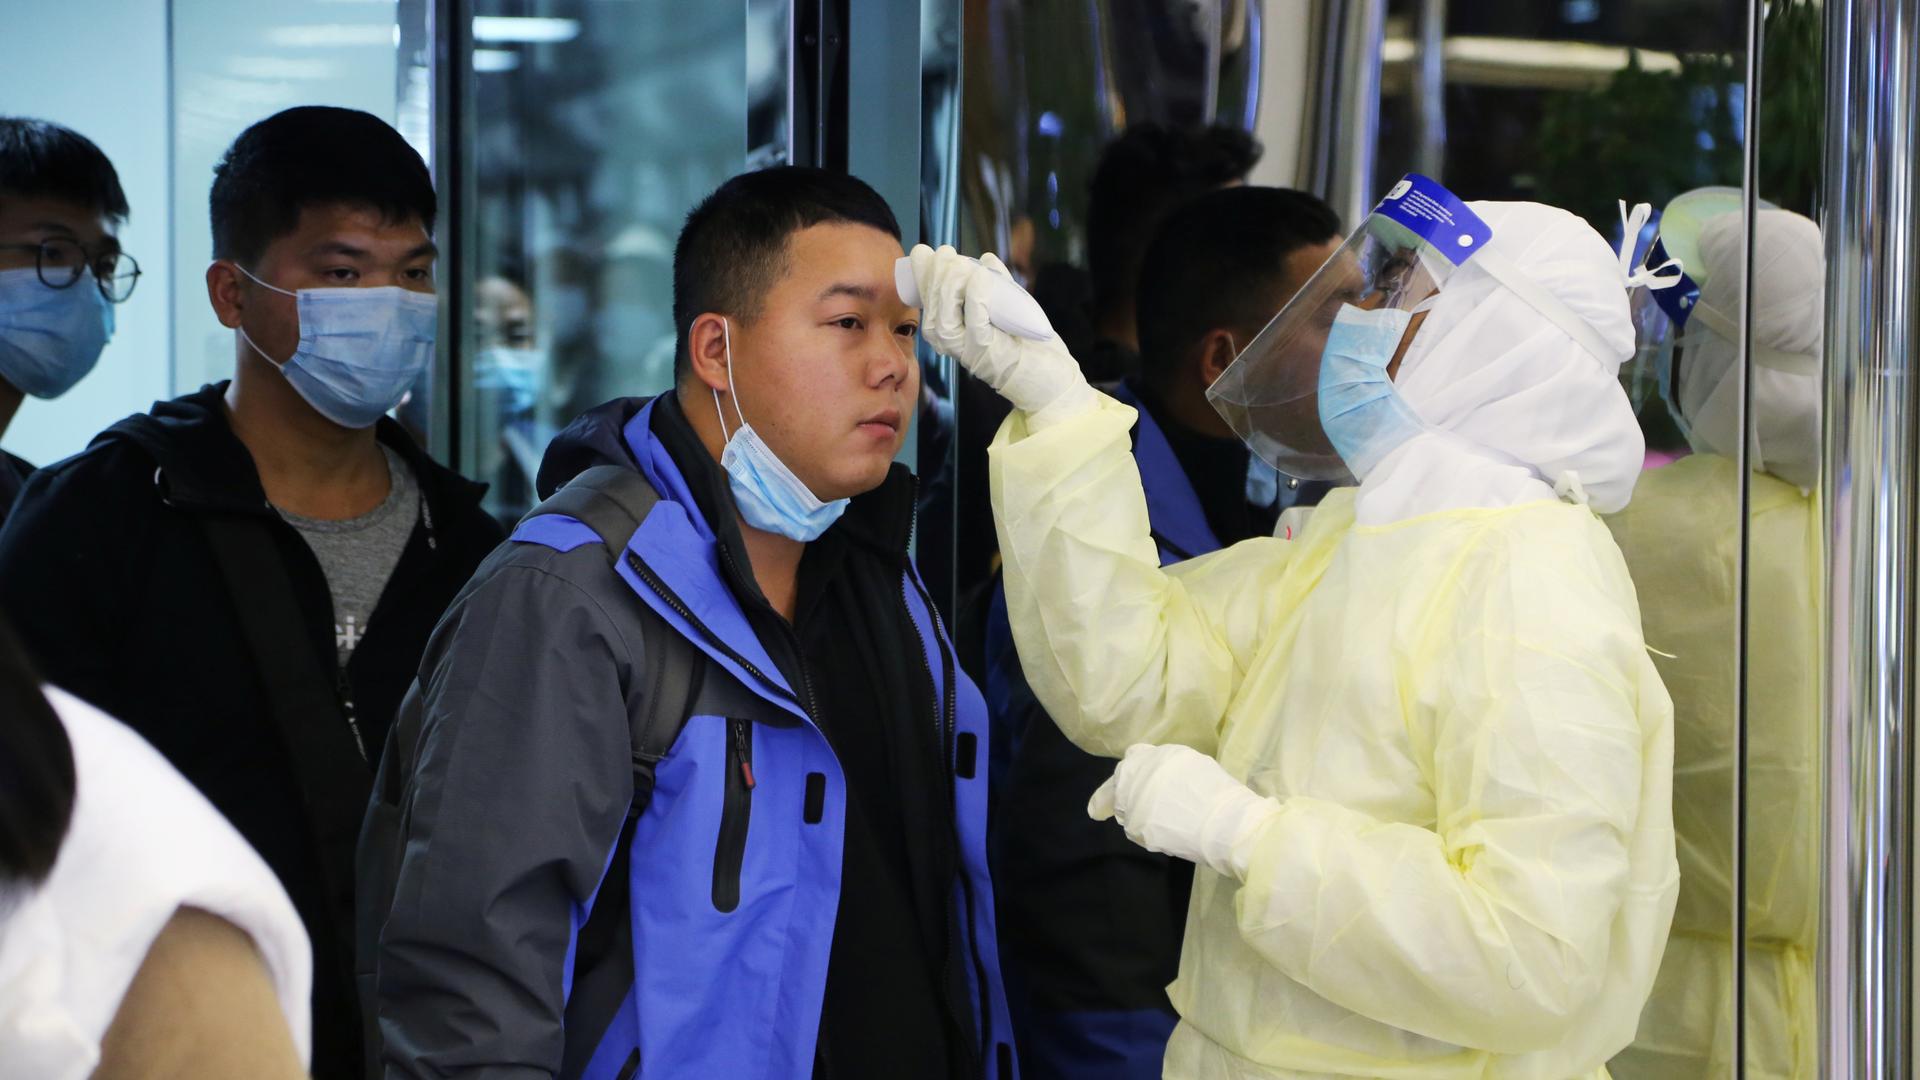 A man wears a mask as he gets checked at airport for virus